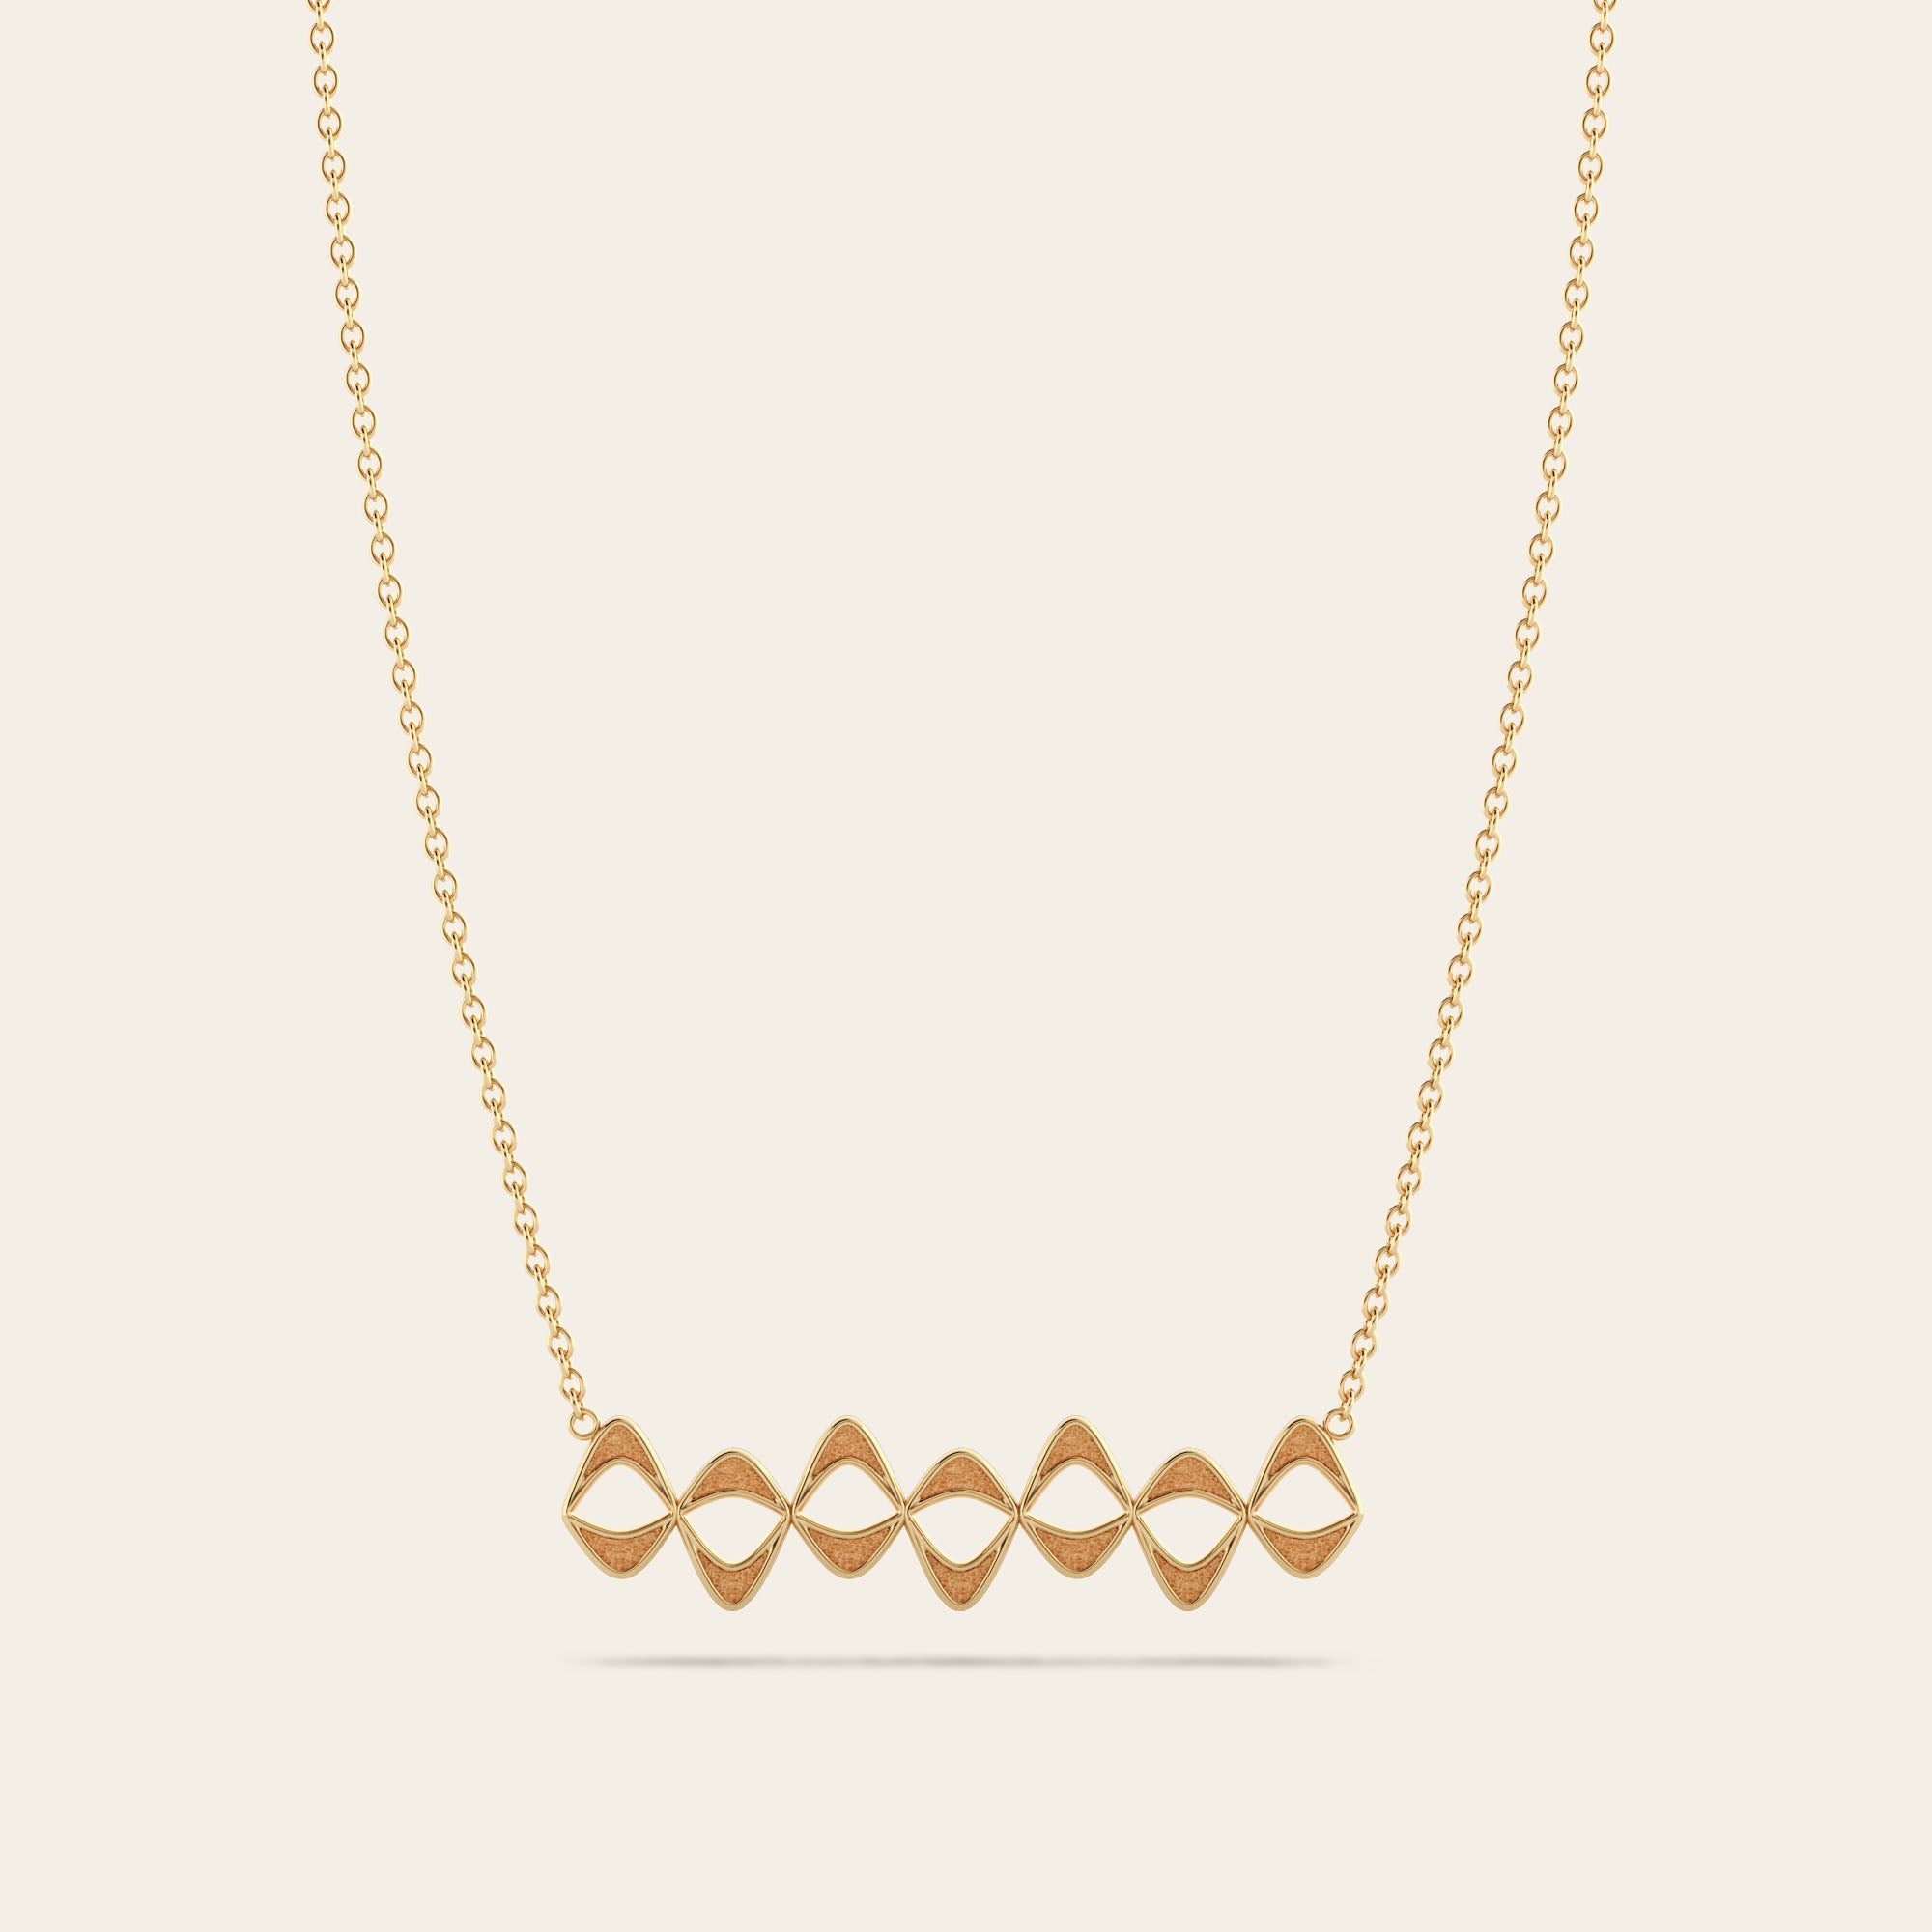 Flowing Cadence Necklace in 18k Yellow Gold